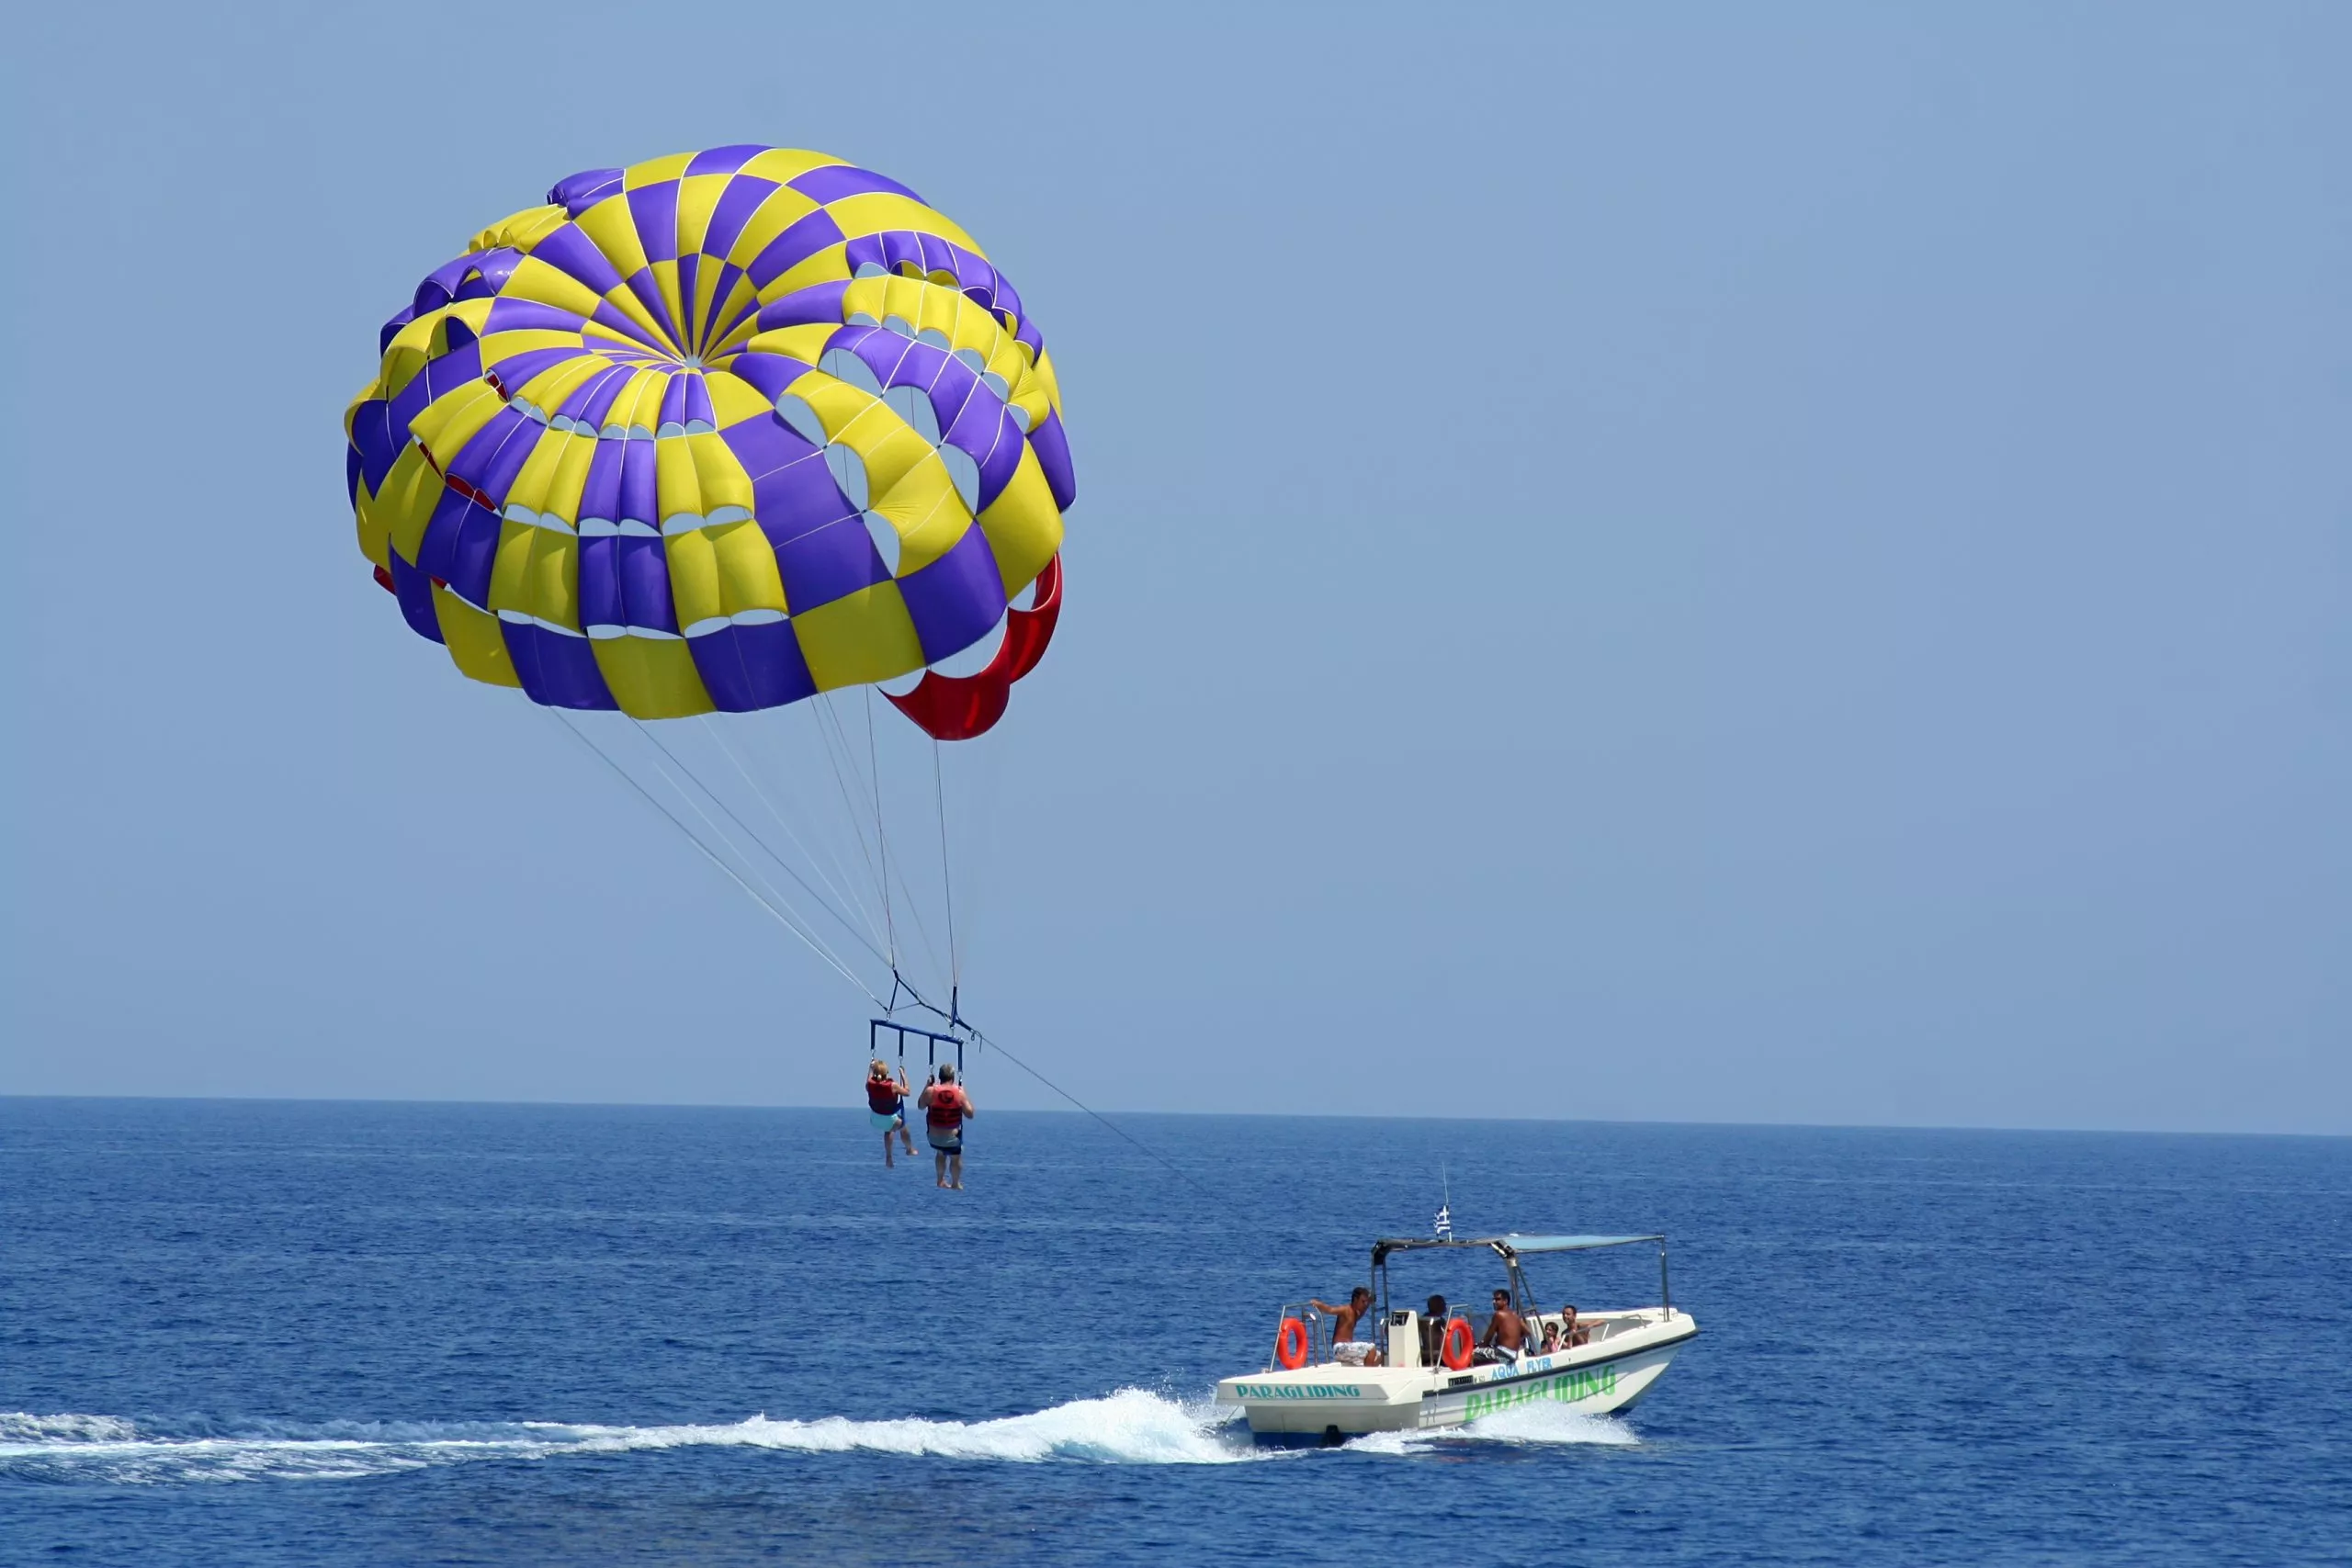 Parasail Sicilia in Italy, Europe | Parasailing - Rated 1